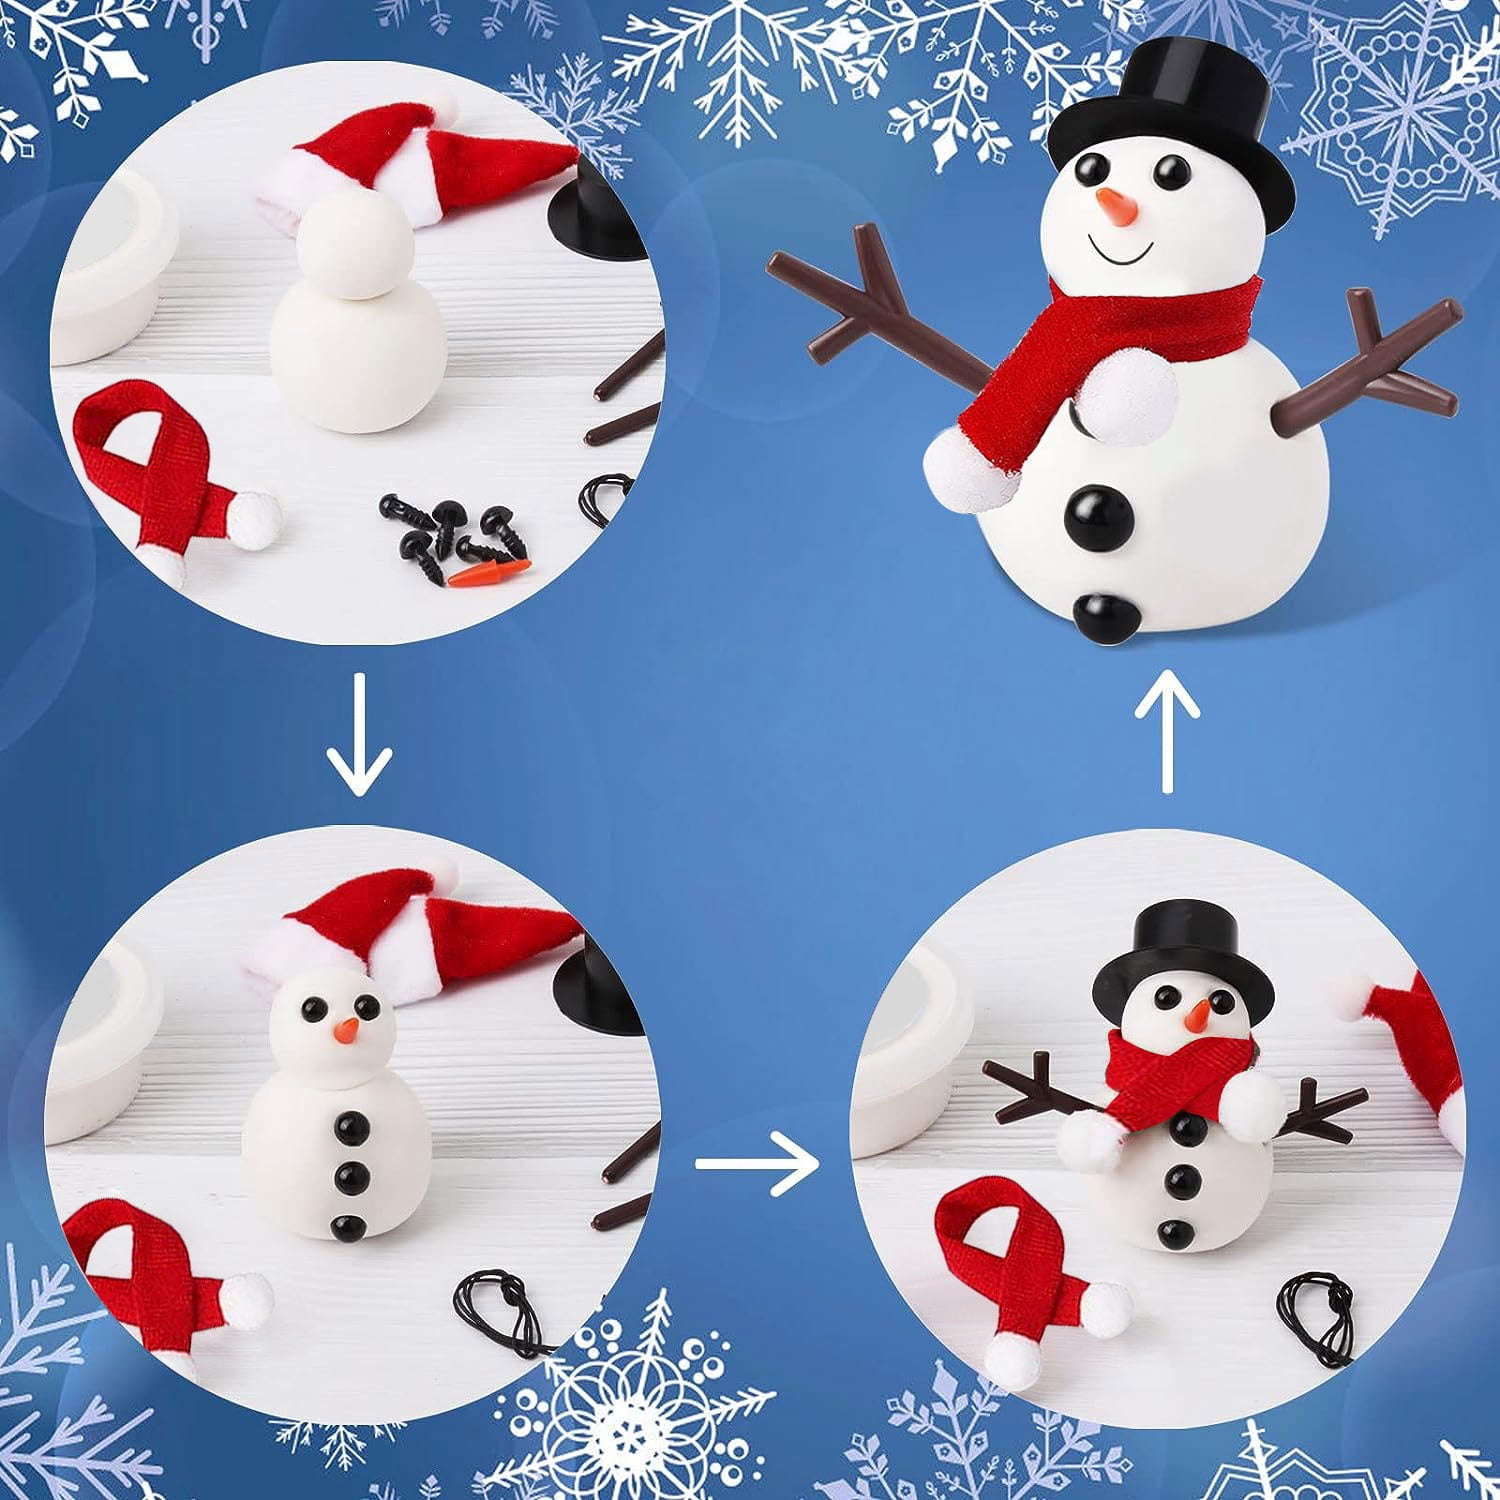 Easy Snowman Craft - Winter Craft For Kids - Non-Toy Gifts